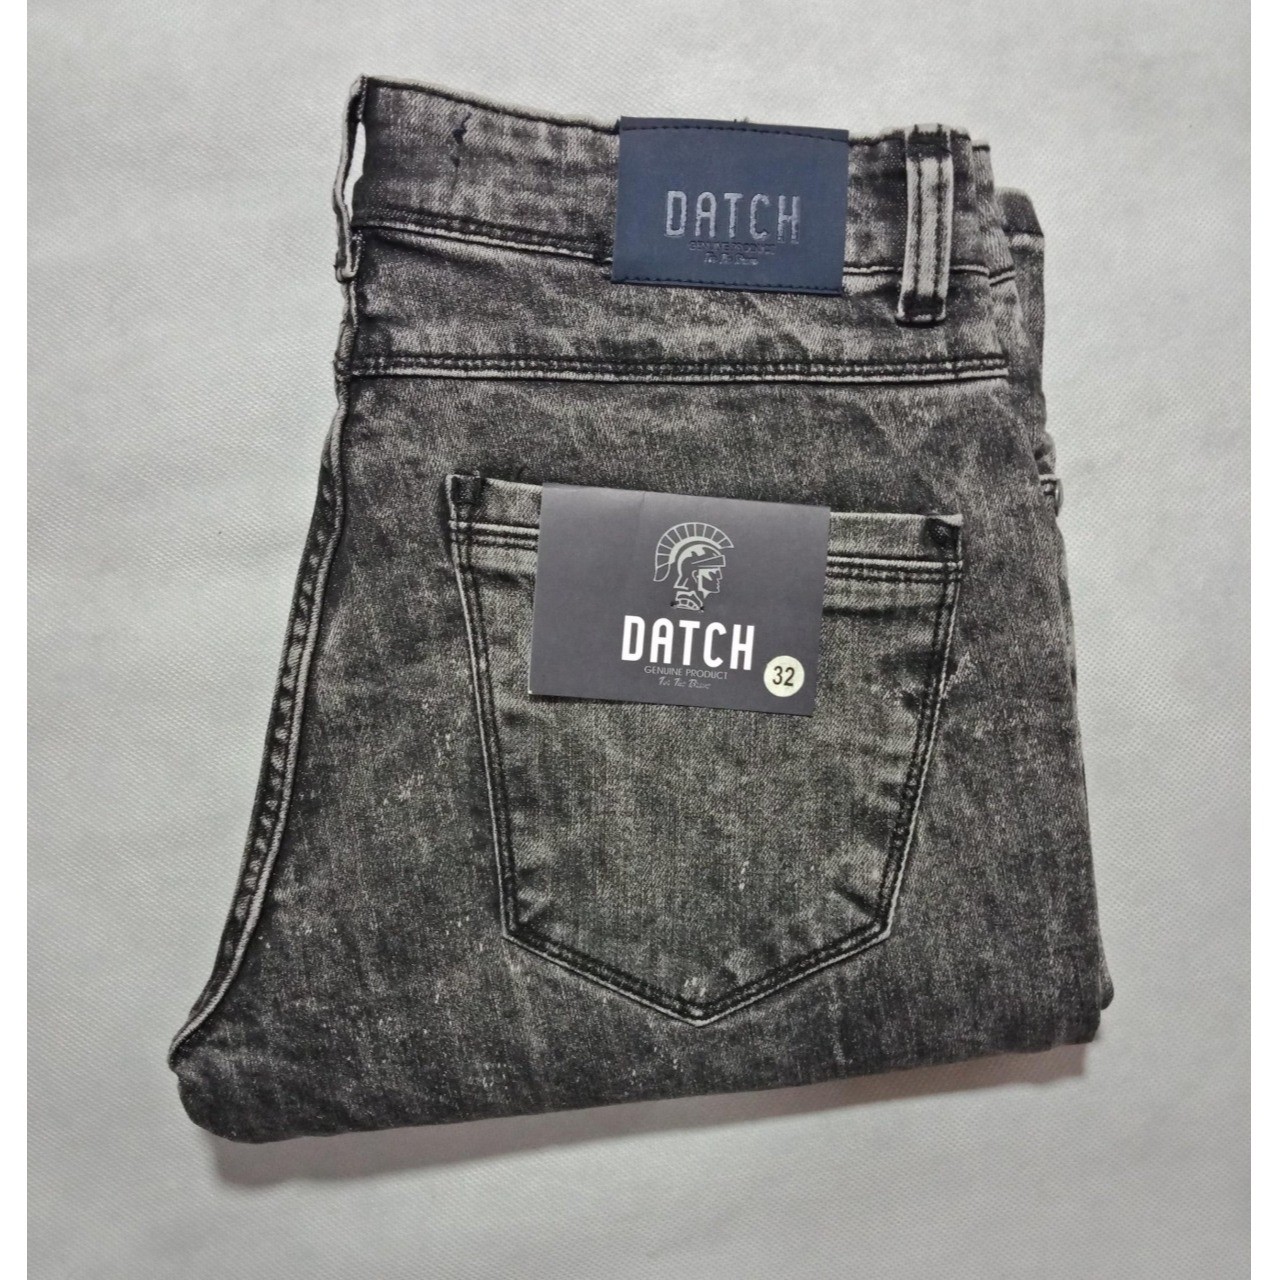 Charcoal Grey Wash Datch Genuine Stretch Export Quality Jeans